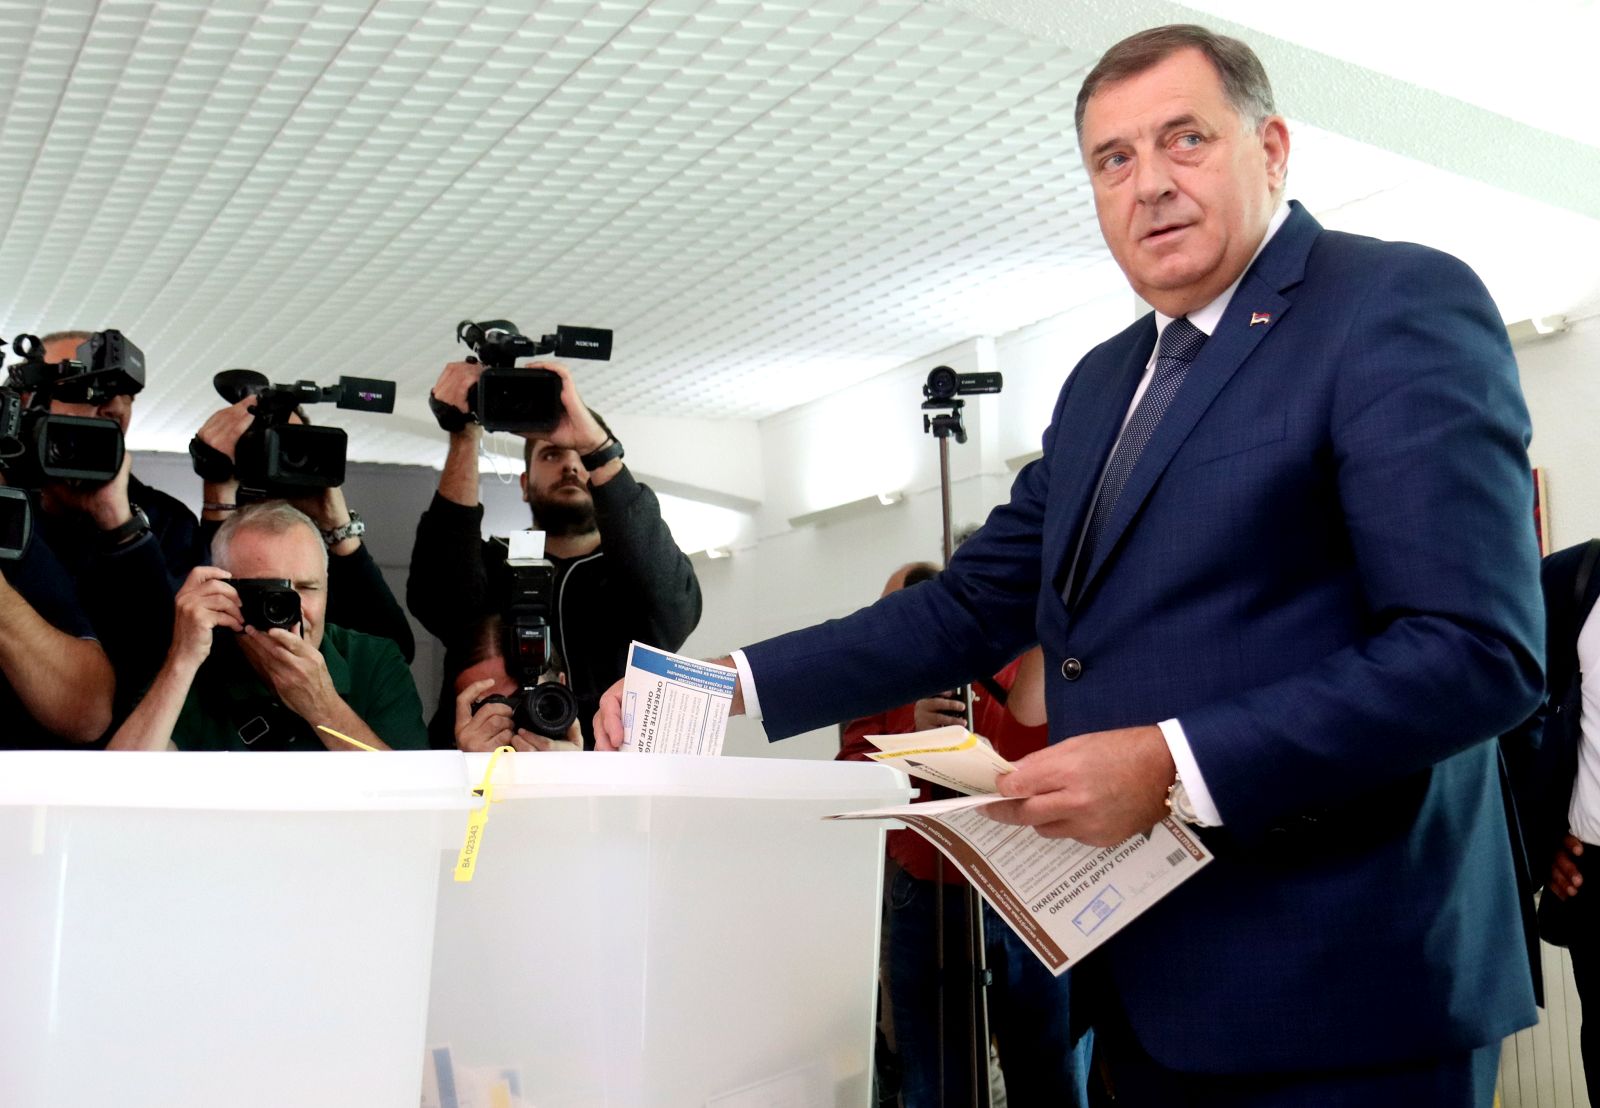 epa10219183 Milorad Dodik, a candidate for the President of Republika Srpska entity of Bosnia and Herzegovina, casts his vote in the country's general elections, in Banja Luka, Bosnia and Herzegovina, 02 October 2022. More than three million Bosnian citizens are expected to vote in the country's general elections in which 90 political parties and 10 candidates for the three Bosnian Presidency members were registered. The Bosnian Presidency according to the country's constitution always has to have three members, a Bosniak, a Serb, and a Croat, representing the three main ethnic groups  EPA/ALEKSANDAR GOLIC